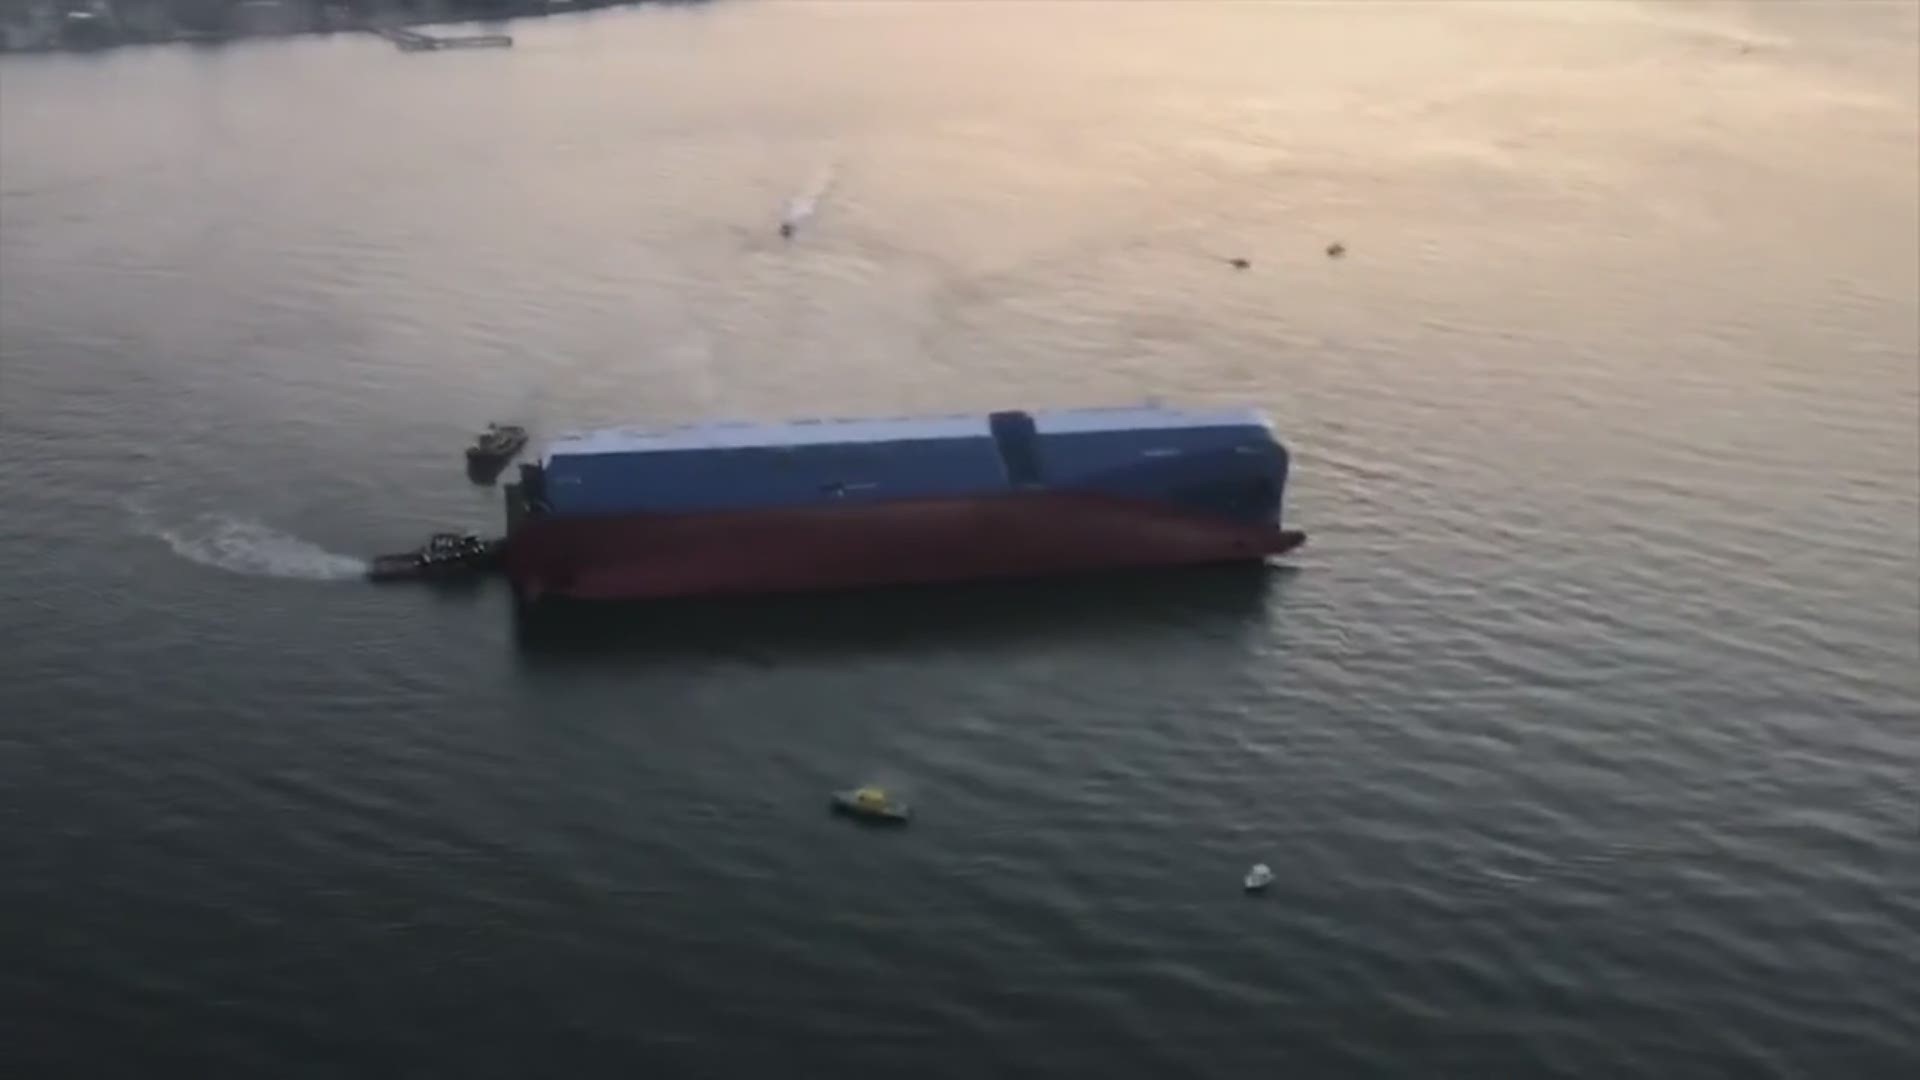 Ariel footage shows smoke emanating from an overturned cargo ship in the St. Simons Sound. Twenty crew members were rescued but four remain unaccounted for. Courtesy of the U.S. Coast Guard District 7 Padet Jacksonville